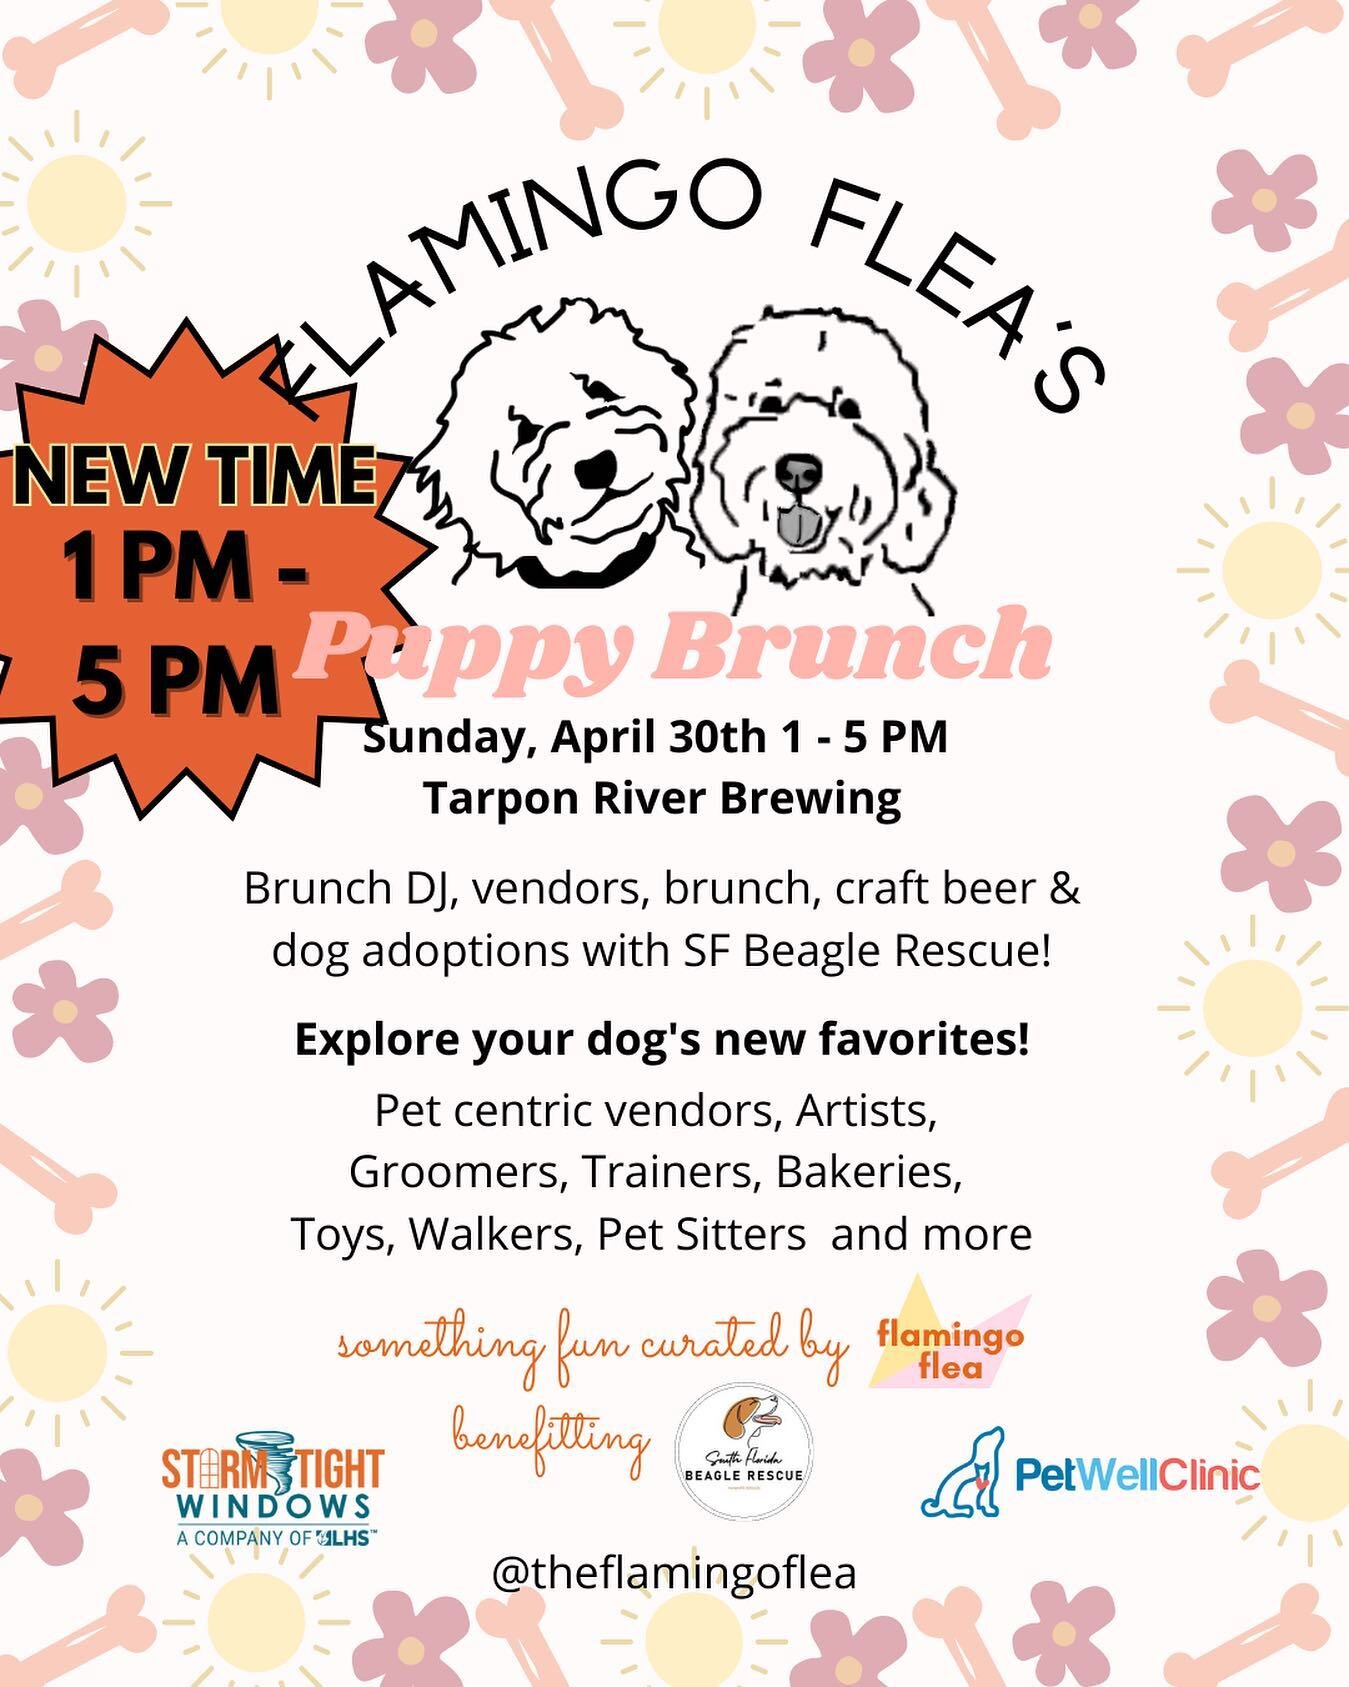 NEW TIME, same day: Sunday, April 30 1 PM - 5 PM. Forecast until and during 12 o&rsquo;clock hour looks like rain 😭with clear skies after 1 pm. 

If you still want to come at 12, @tarponriverbrewing will be serving lunch and drinks. 

See you and yo